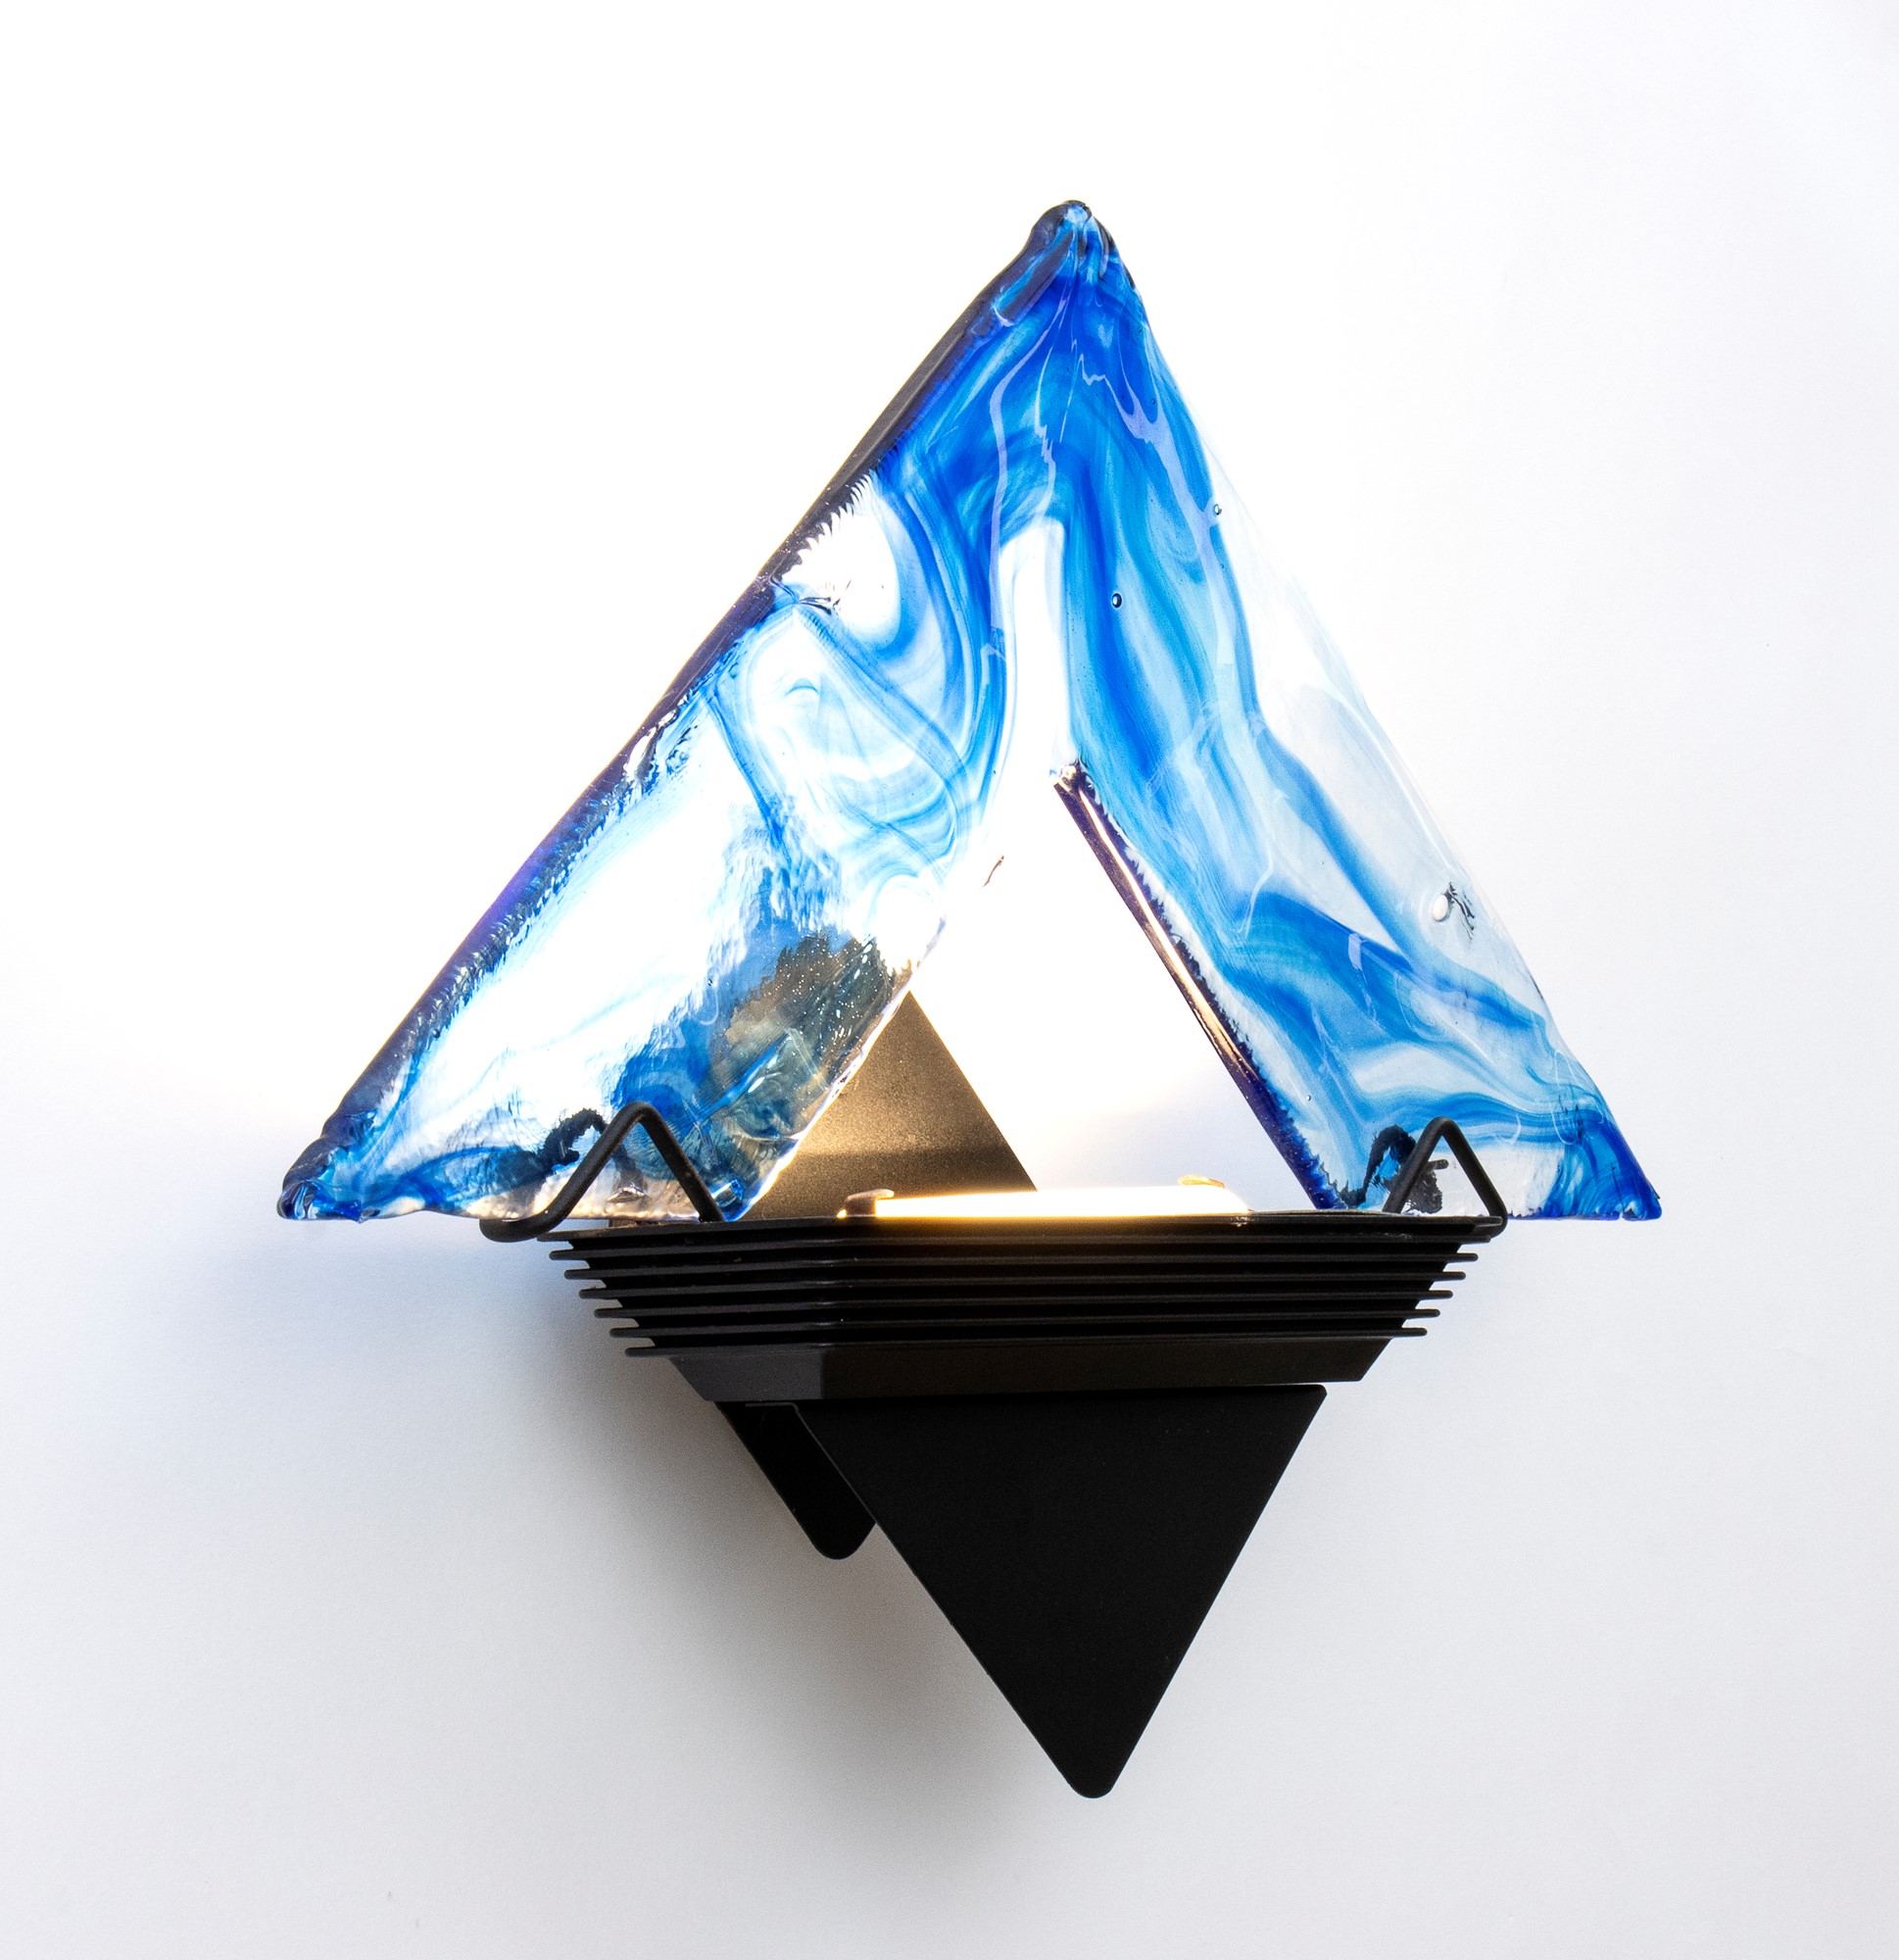 La Murrina wing lamp in hand blown Murano glass mounted on a triangular frame - Image 8 of 27